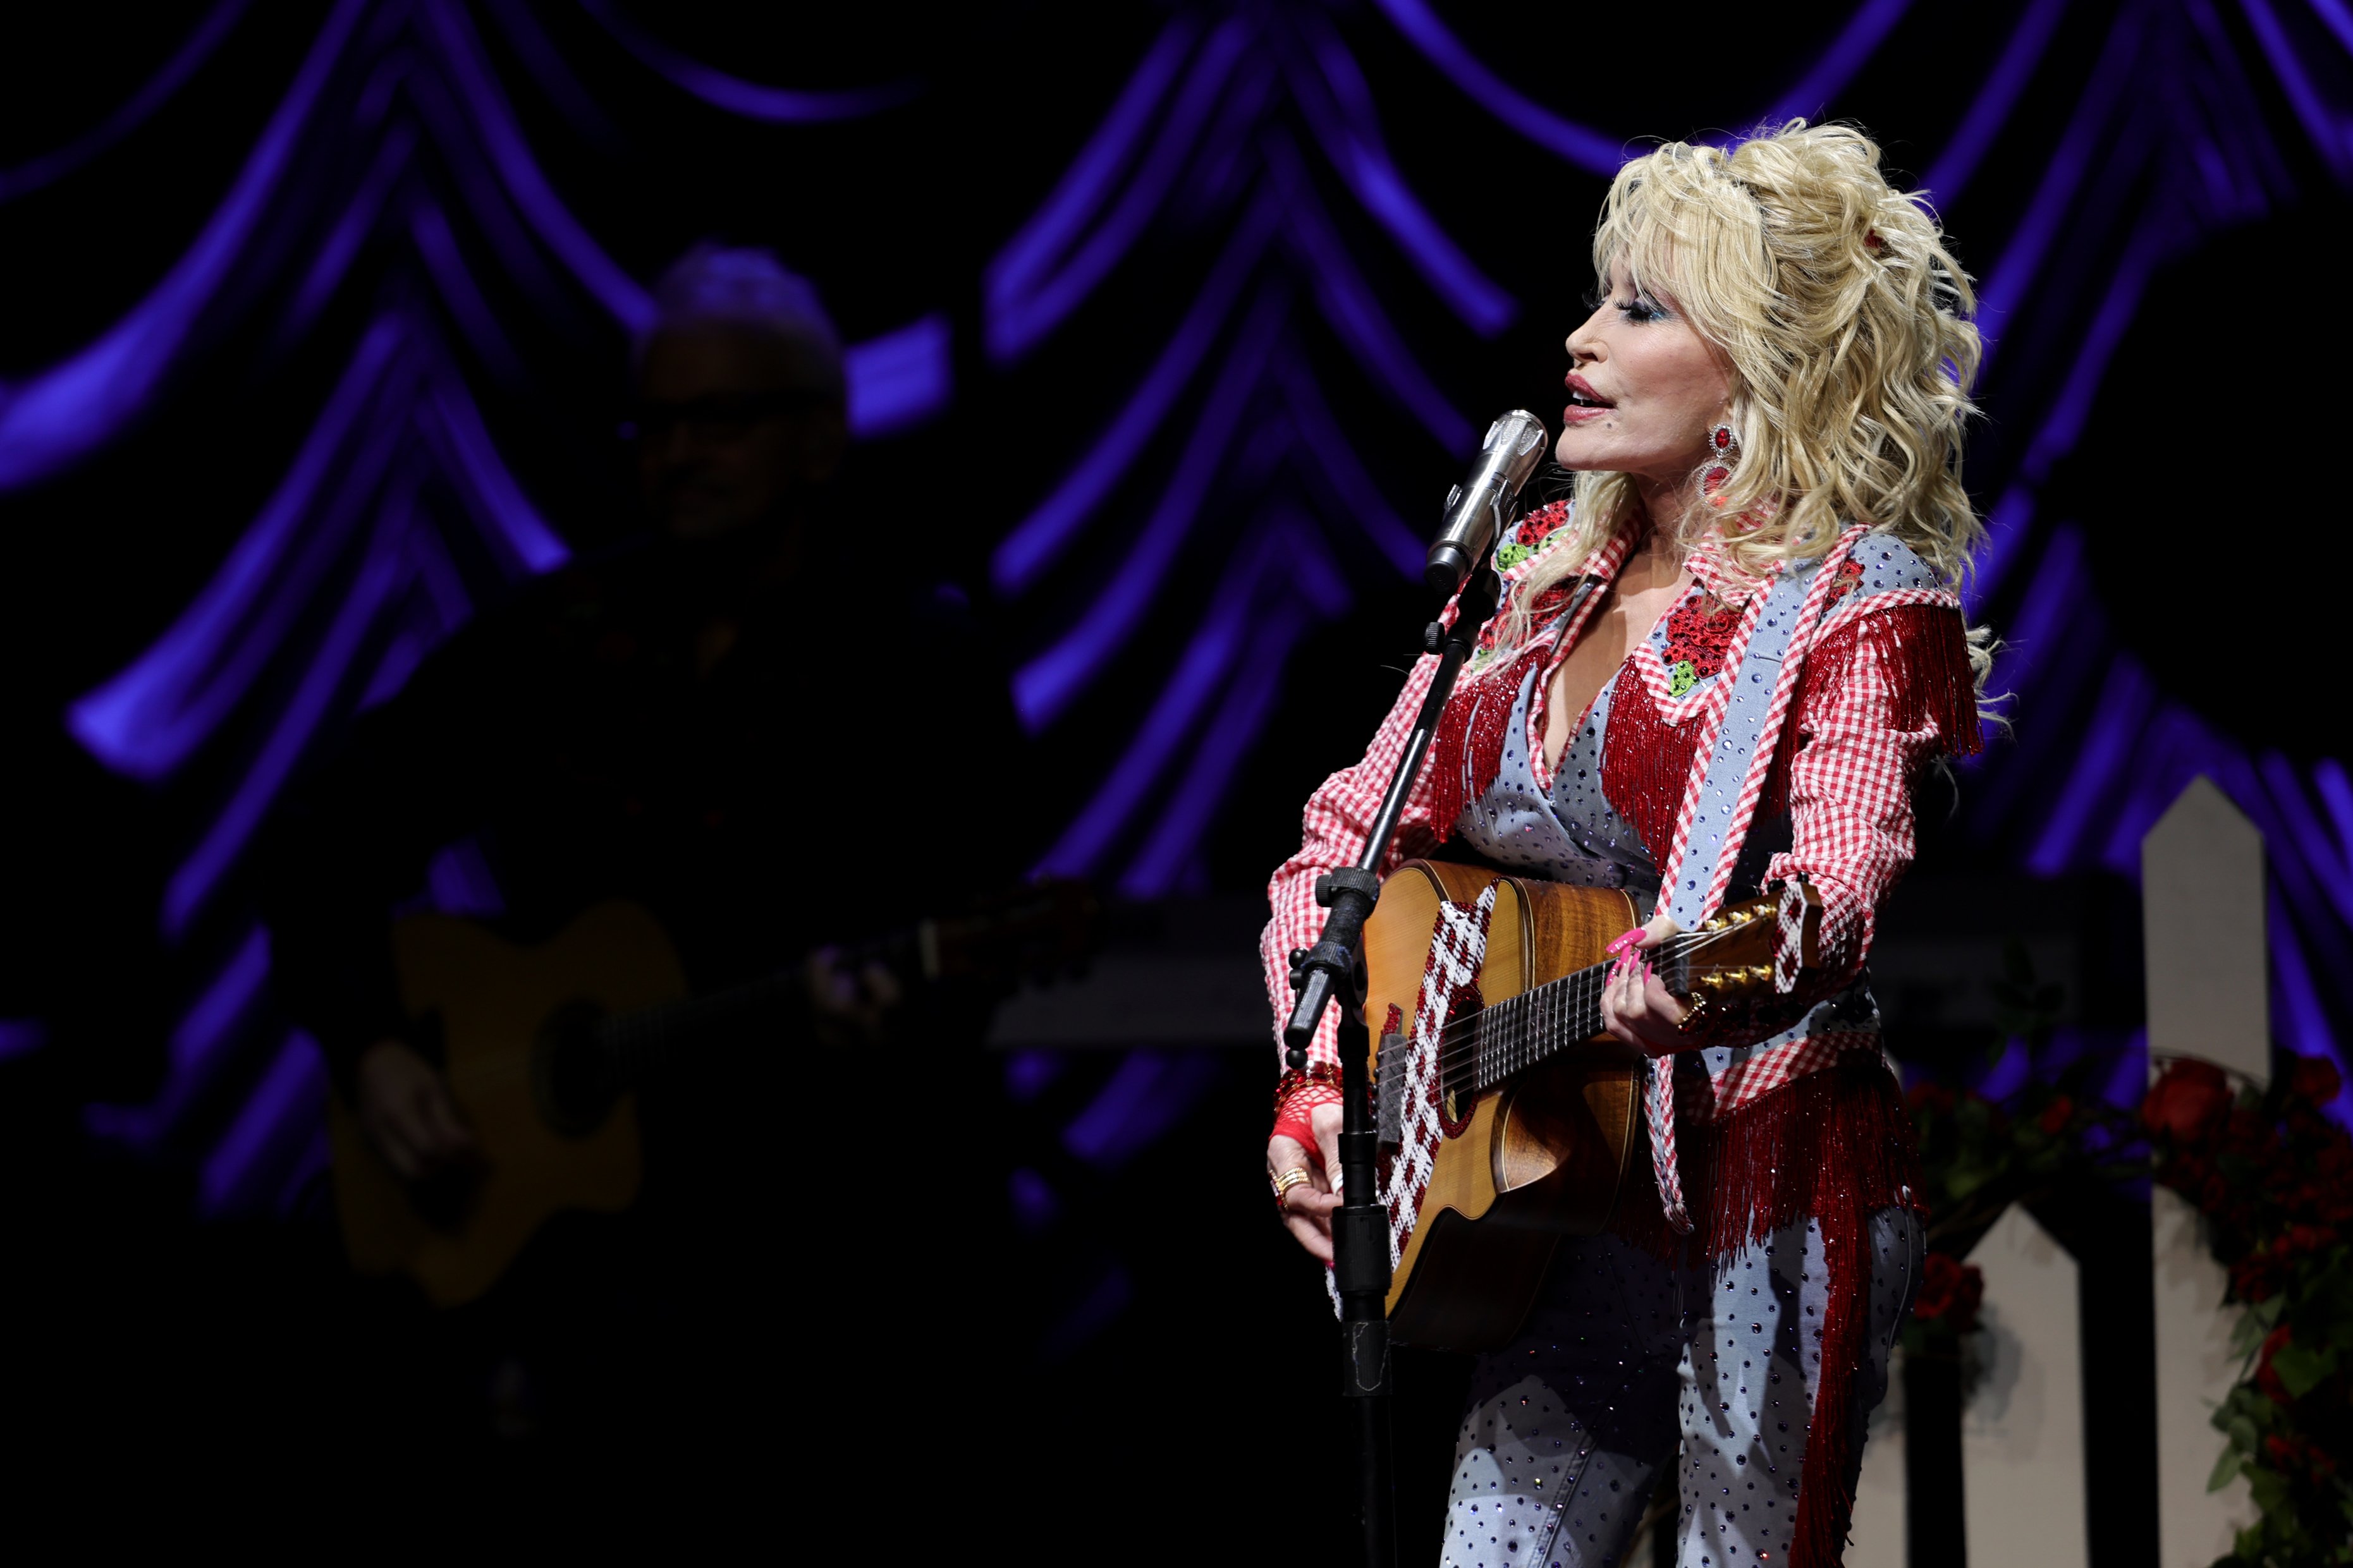 Dolly Parton, who was just inducted in the Rock & Roll Hall of Fame, singing on stage and playing guitar.